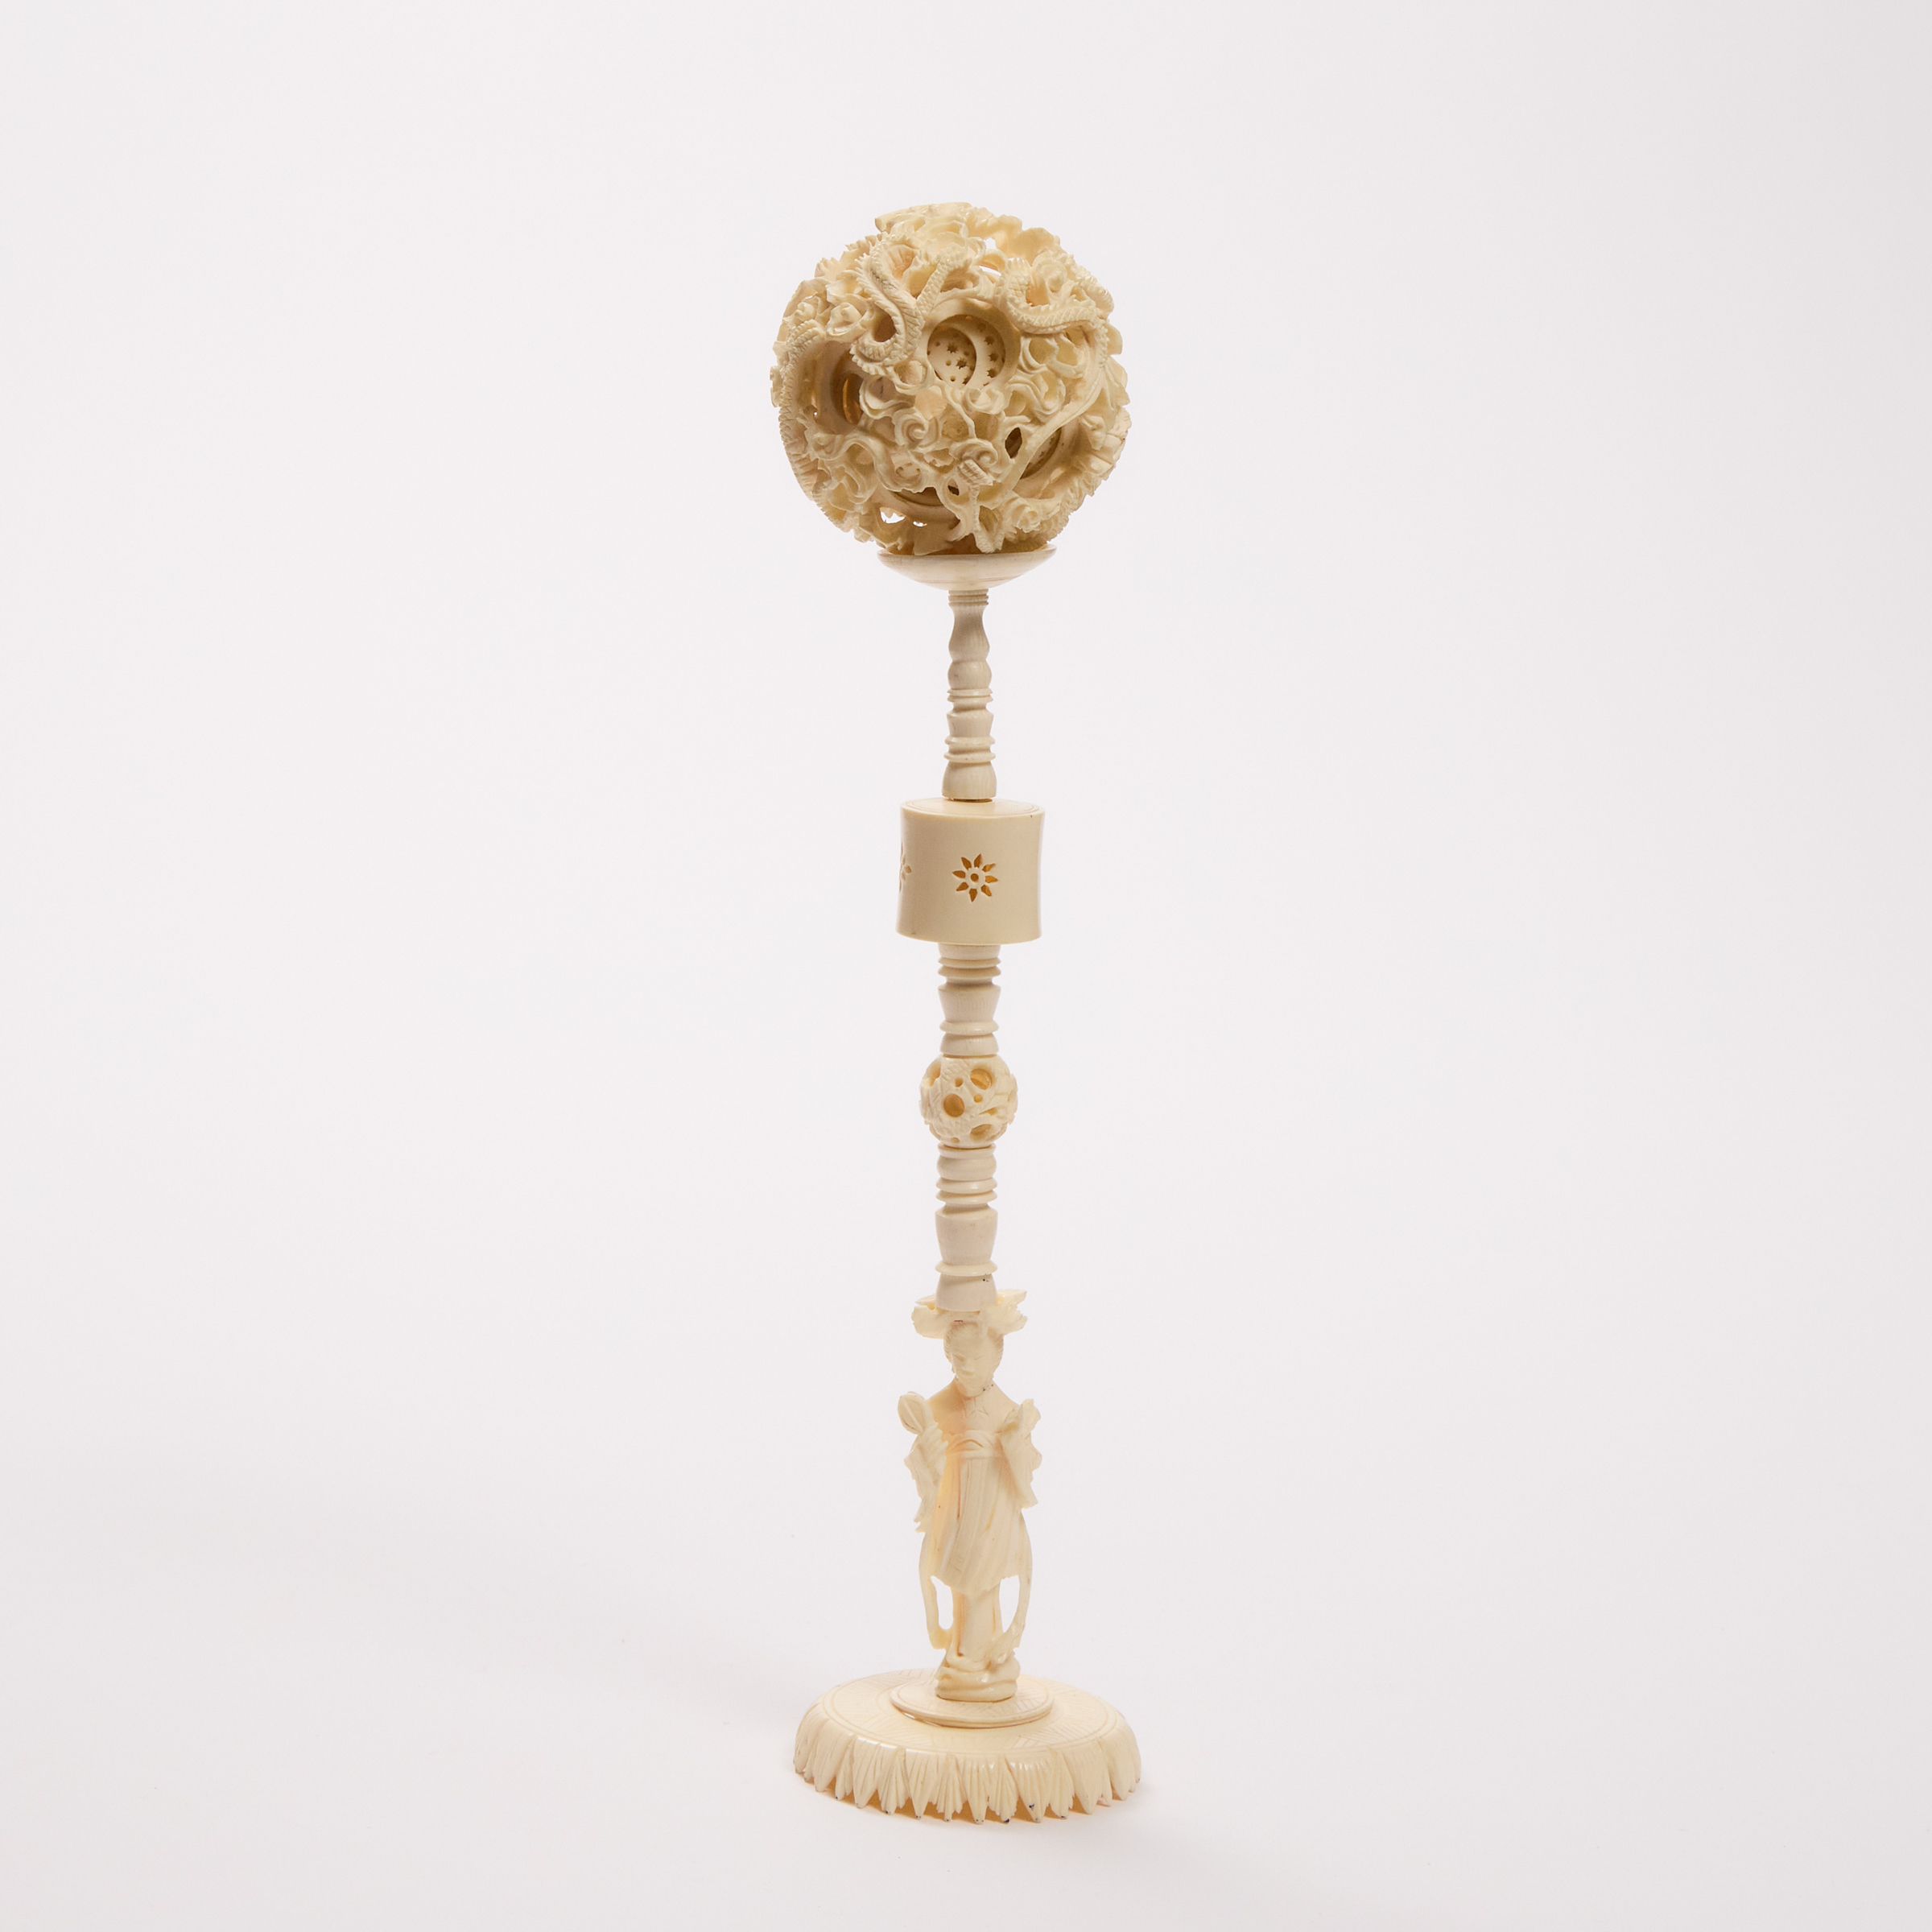 An Ivory Puzzle Ball and Stand  2fb0645